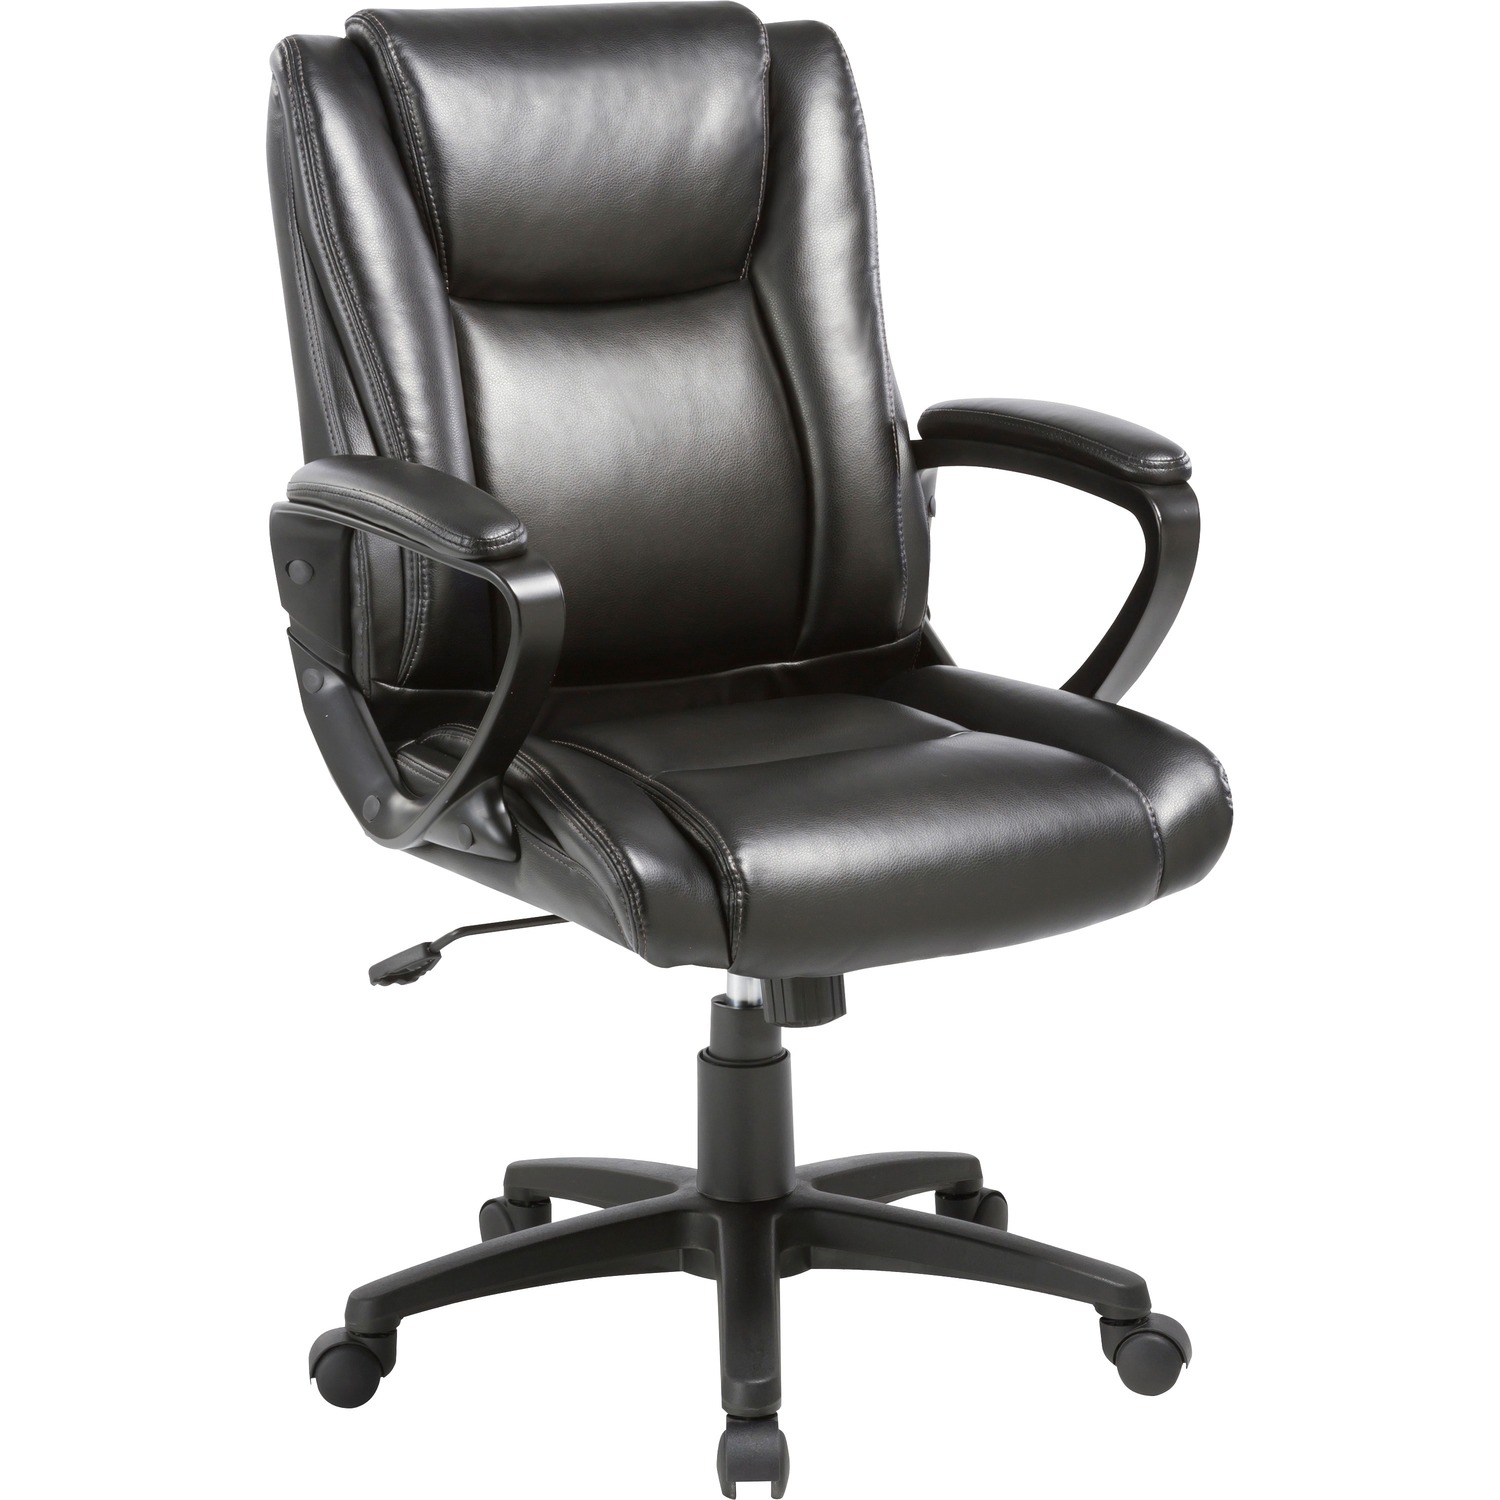 Lorell, Soho High-back Leather Chair, 1 Each - image 1 of 5